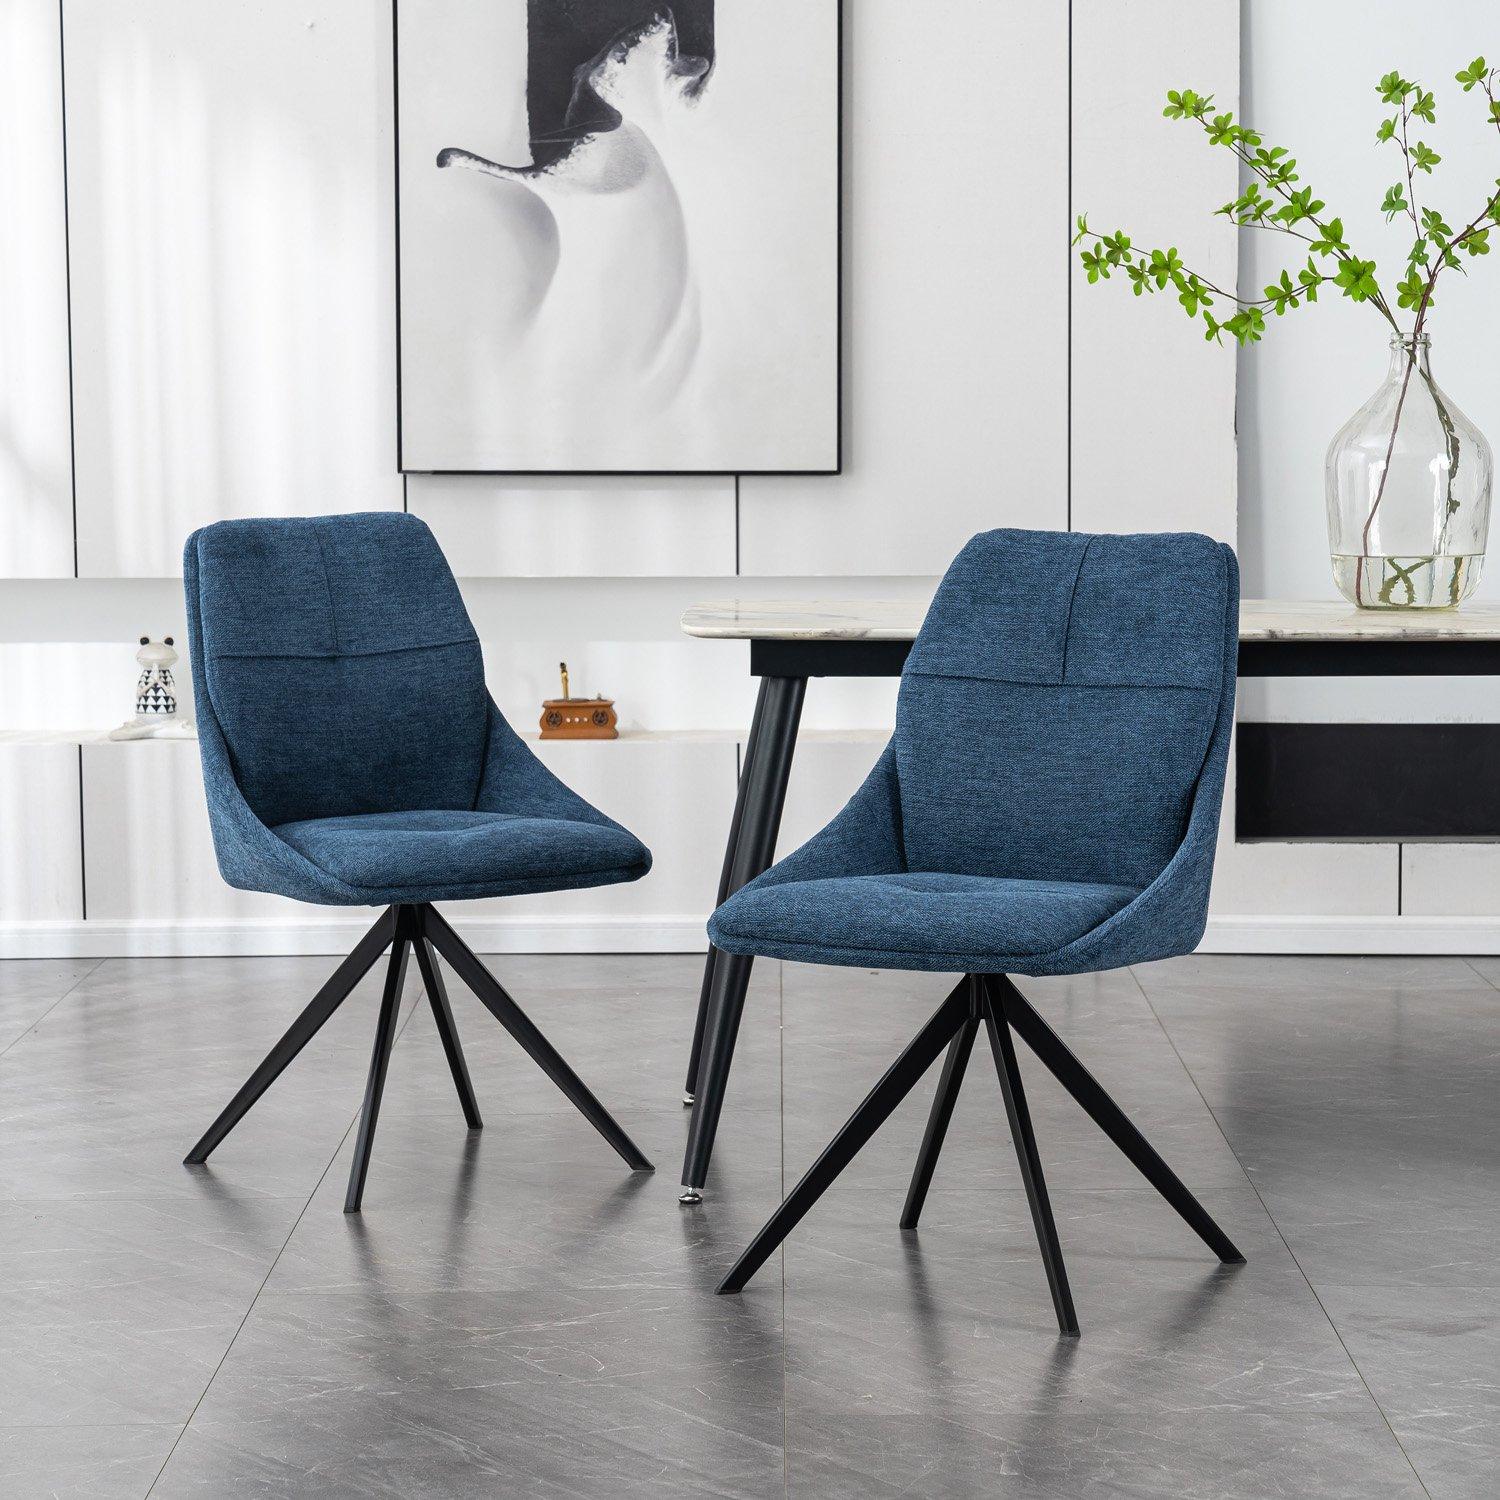 Set of 2 Luna Modern Fabric Dining Chair Padded Seat w Arms Metal Legs